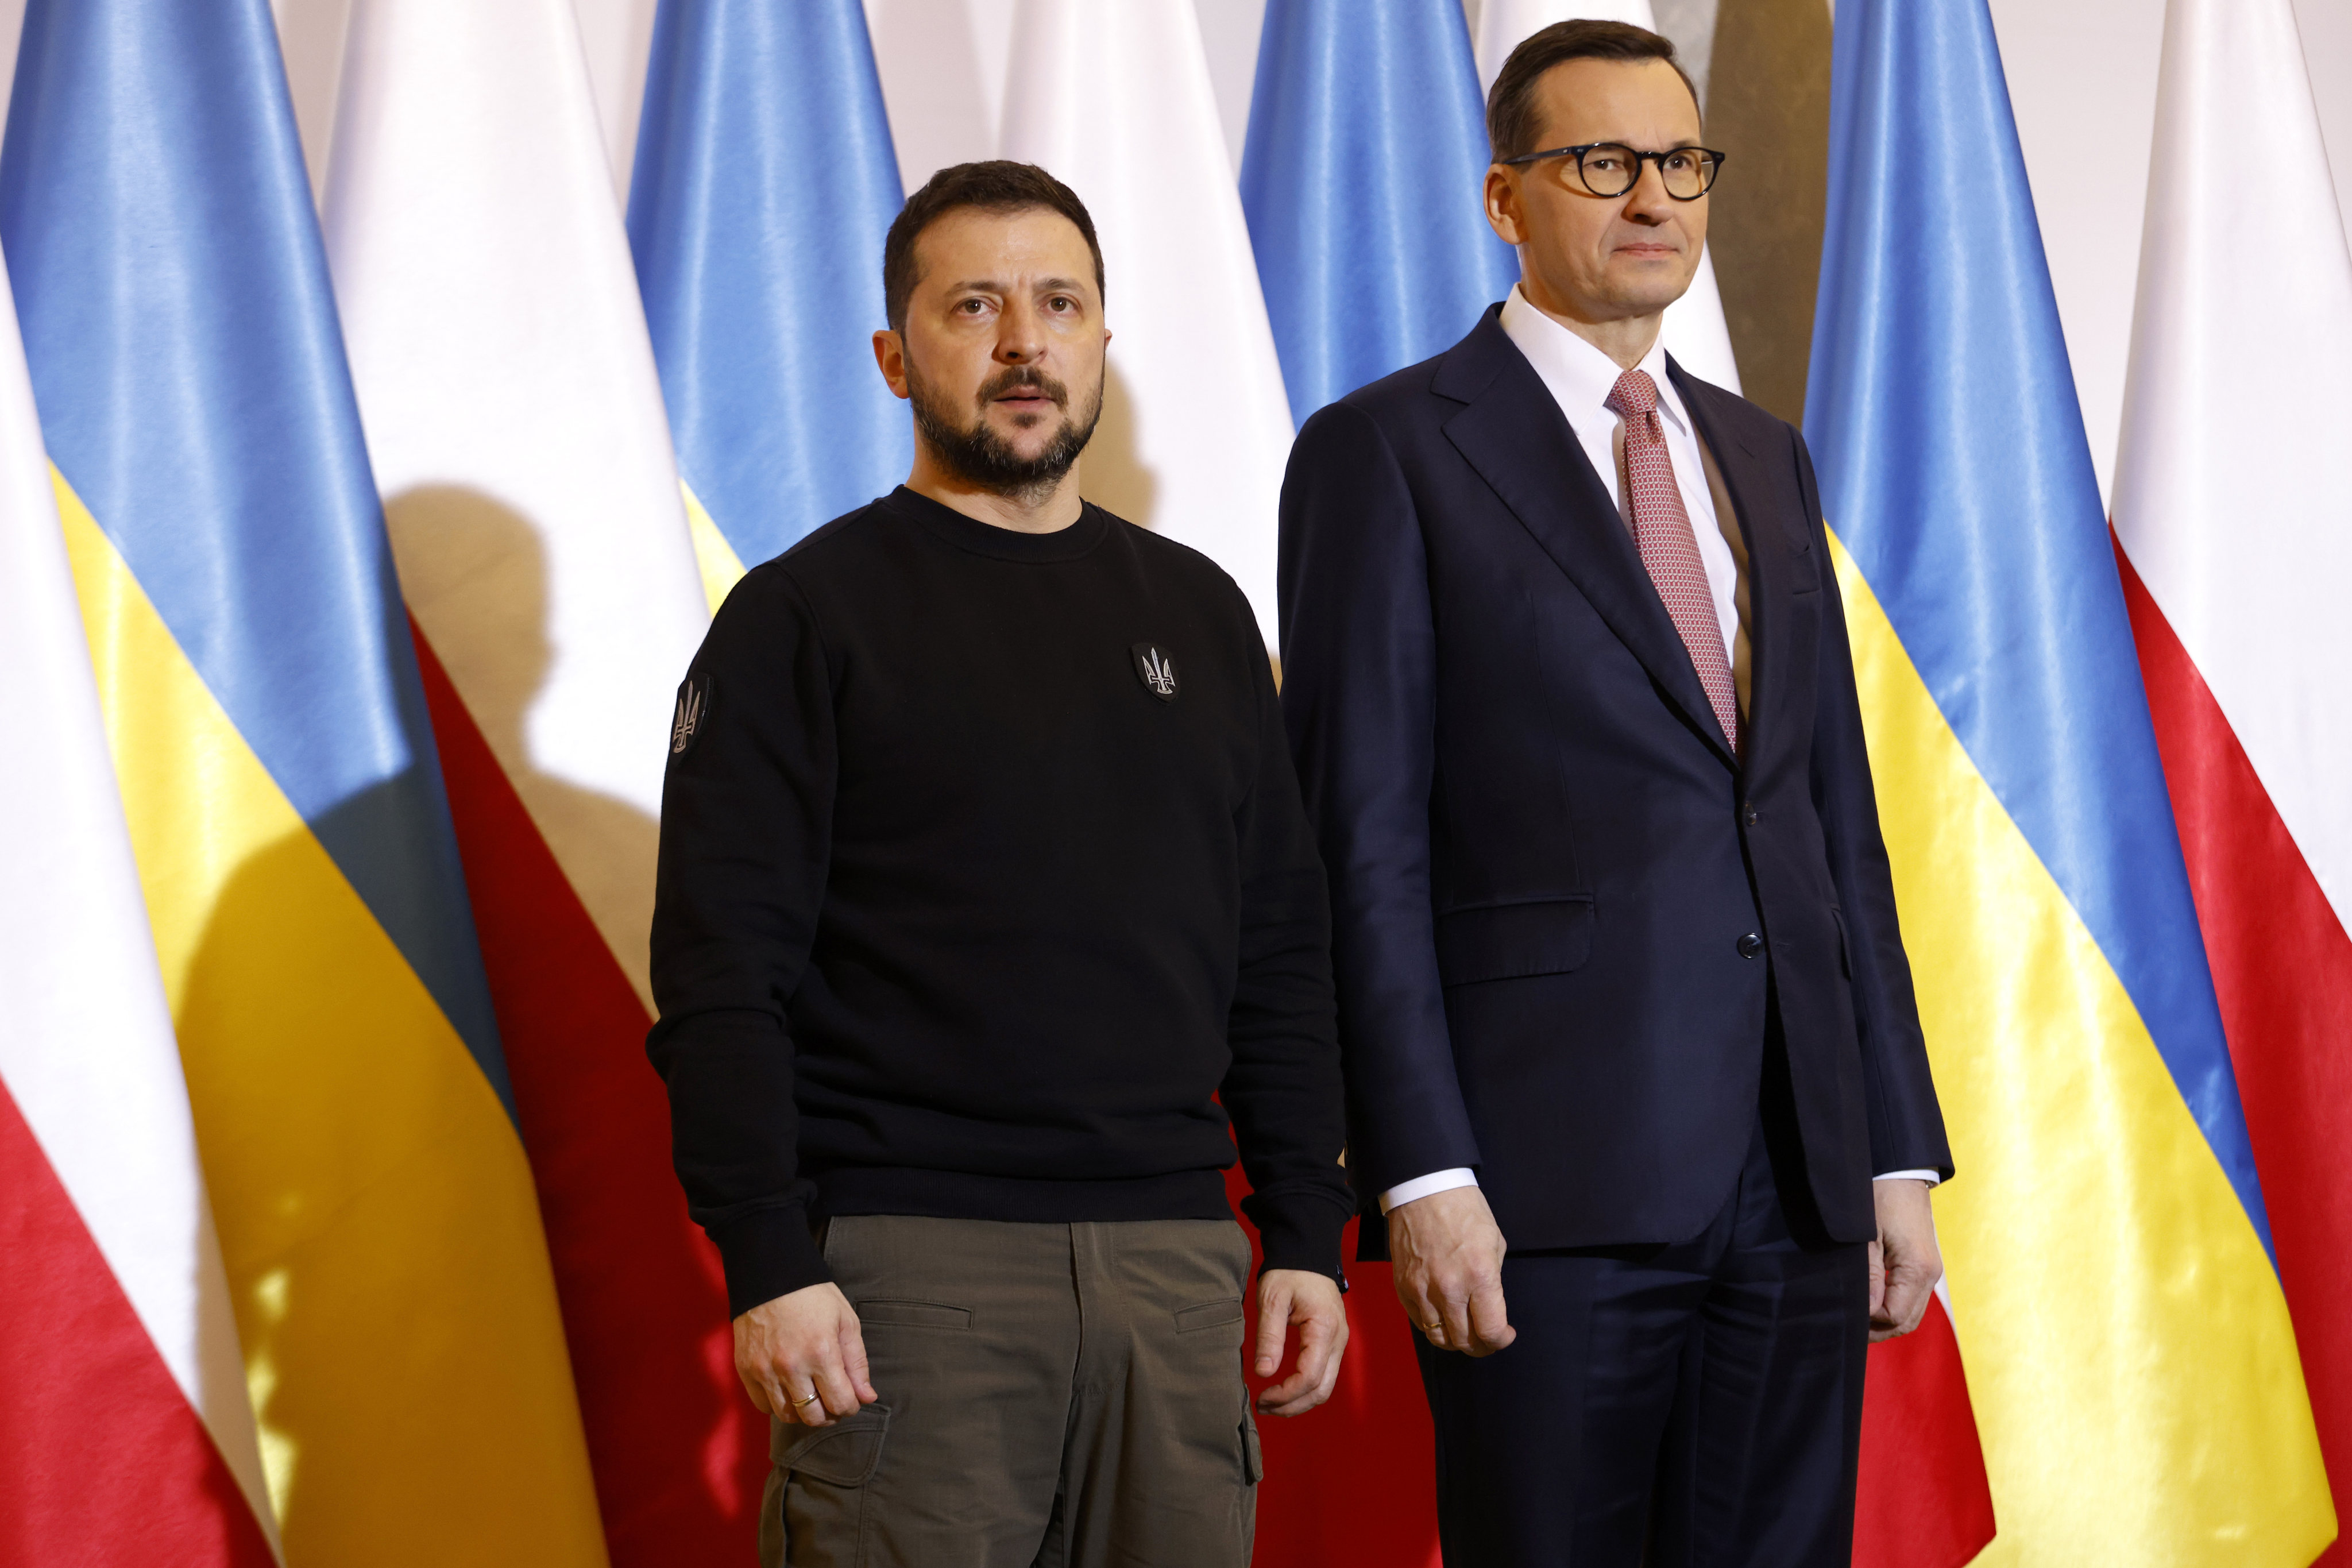 Poland’s Prime Minister Mateusz Morawiecki (right) welcomes Ukrainian President Volodymyr Zelensky as they meet in Warsaw in April. Photo: AP